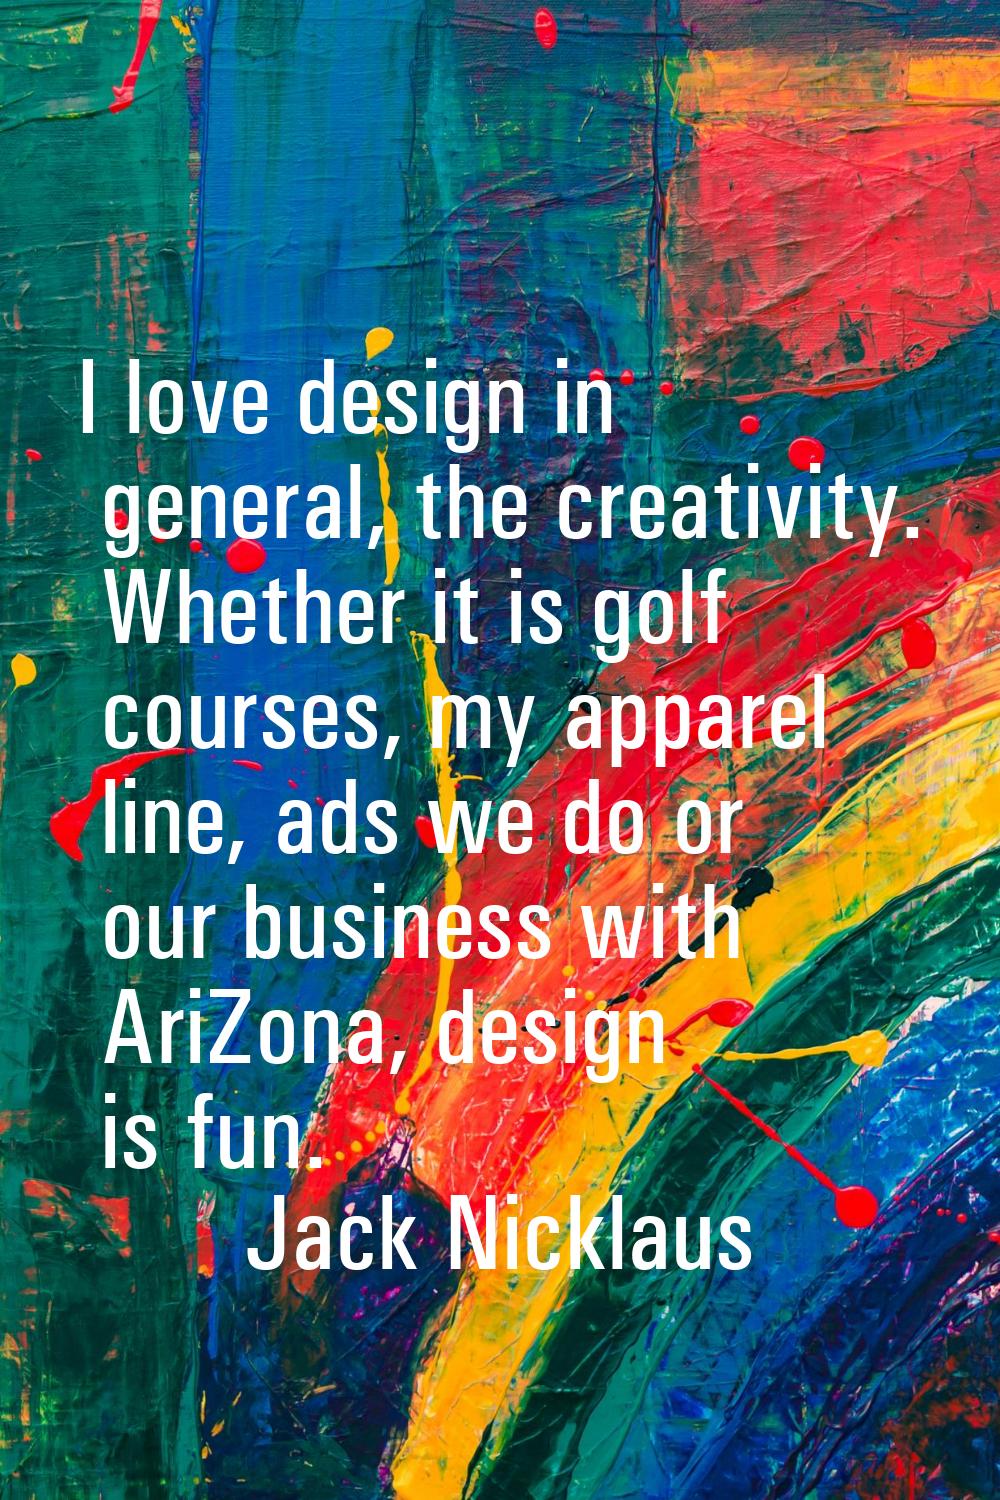 I love design in general, the creativity. Whether it is golf courses, my apparel line, ads we do or